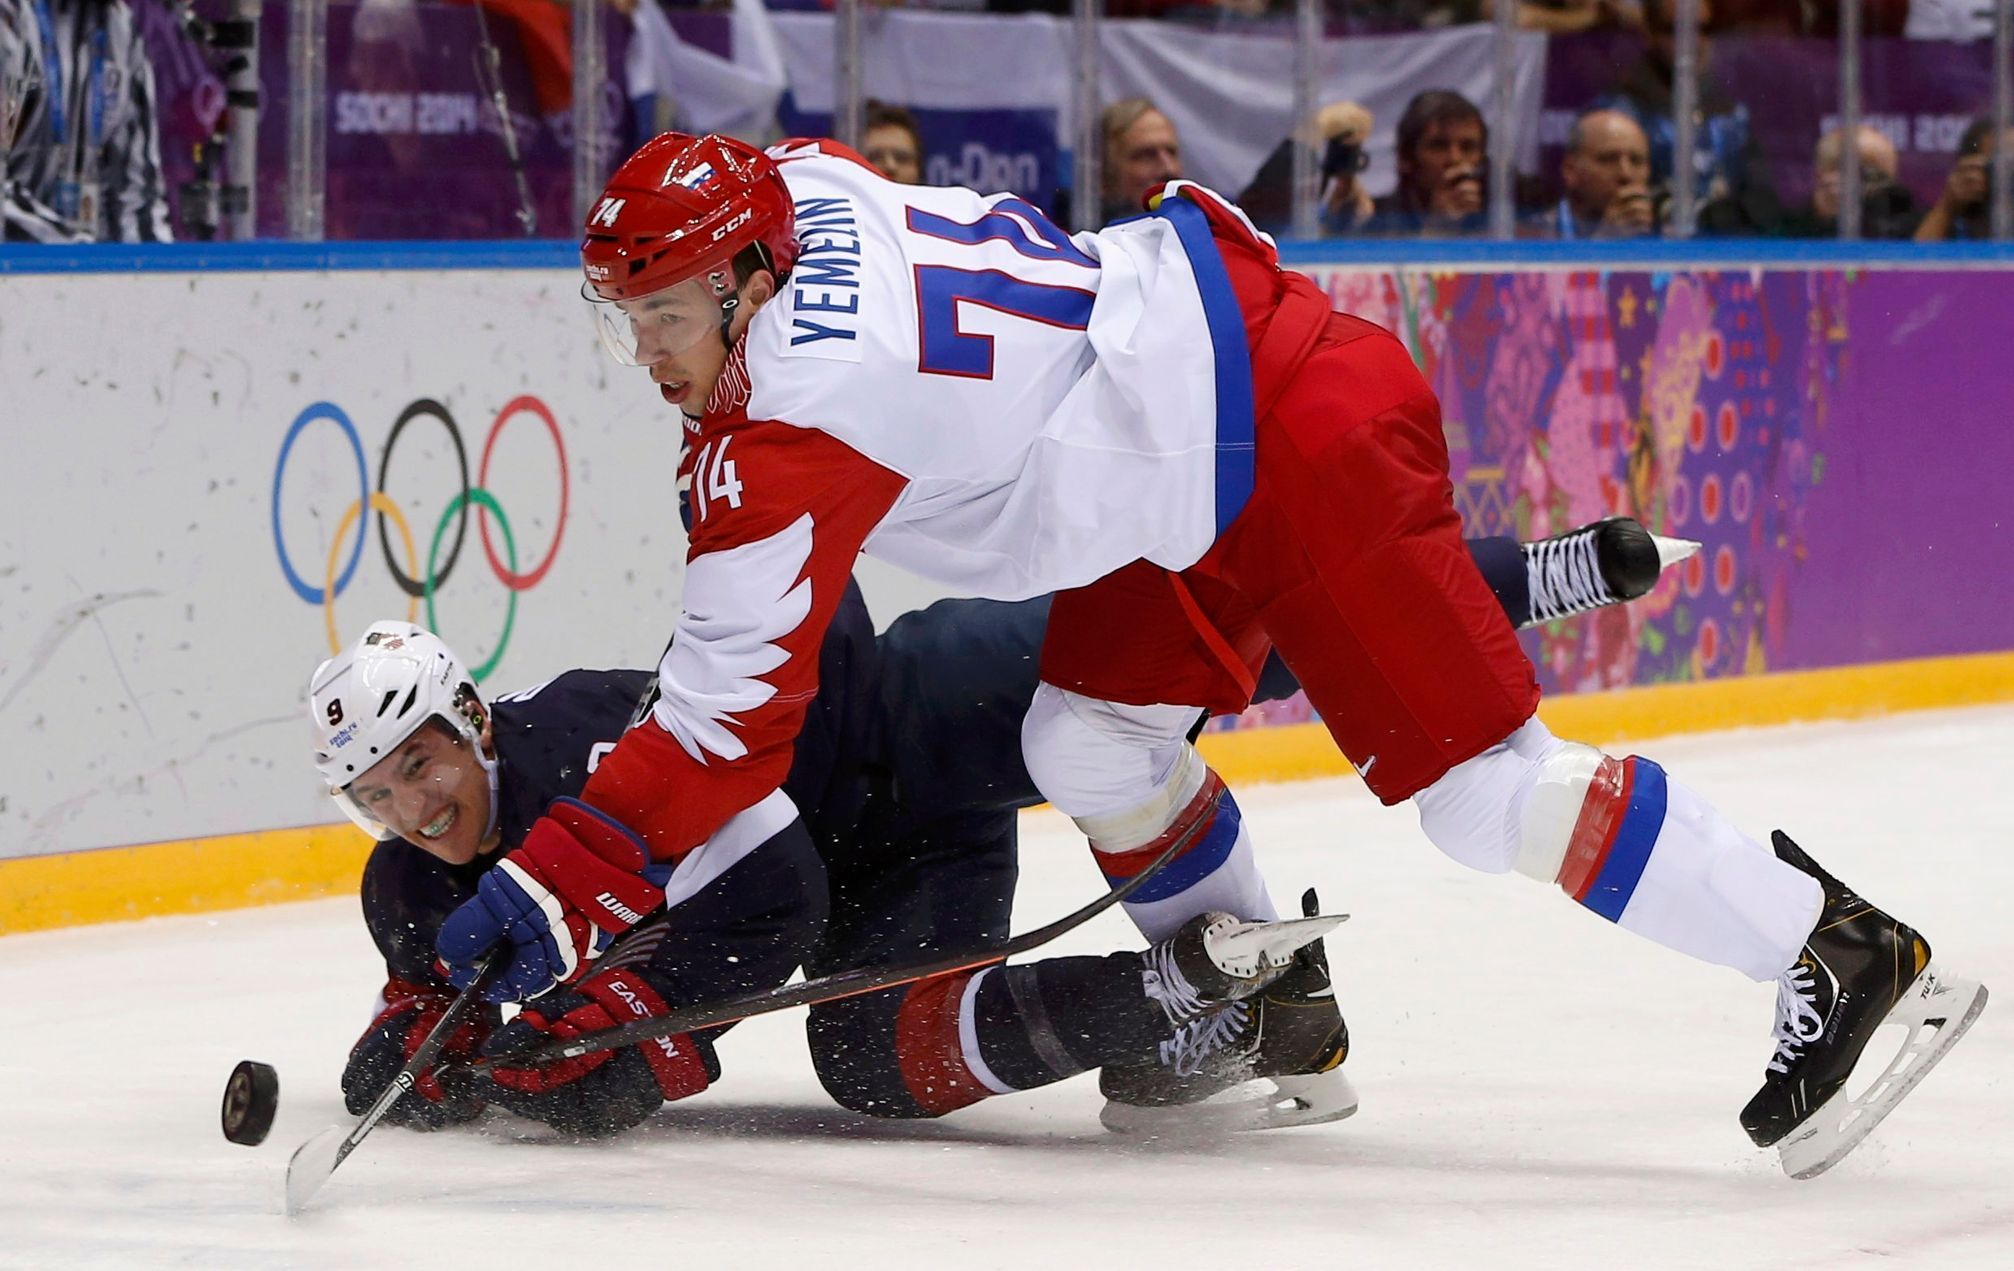 Team USA's Parise and Russia's Yemelin battle for the puck during the first period of their men's preliminary round ice hockey game at the Sochi 2014 Winter Olympic Games